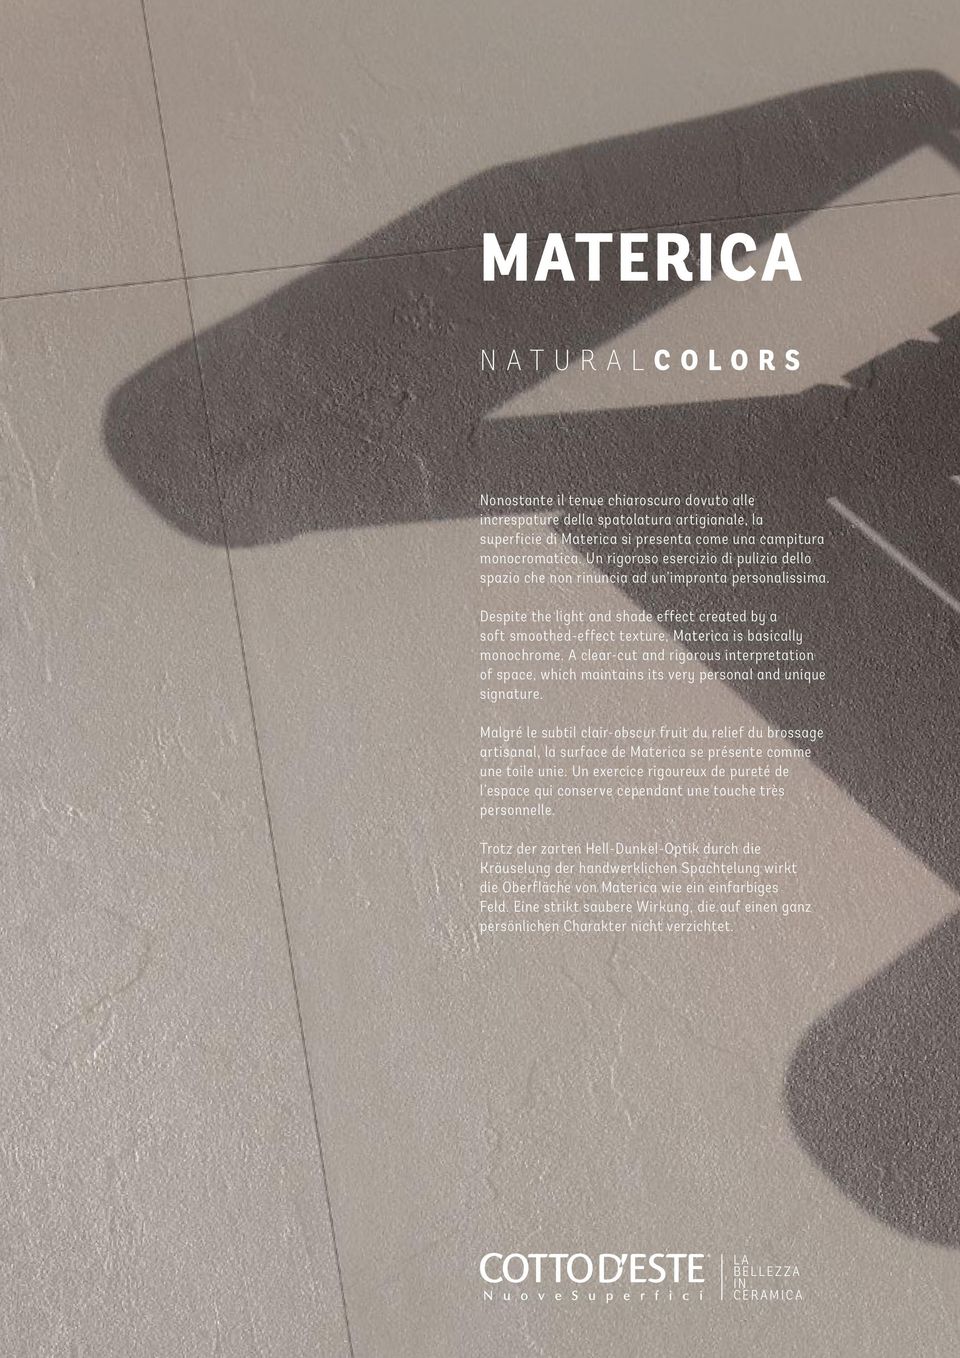 Despite the light and shade effect created by a soft smoothed-effect texture, Materica is basically monochrome.